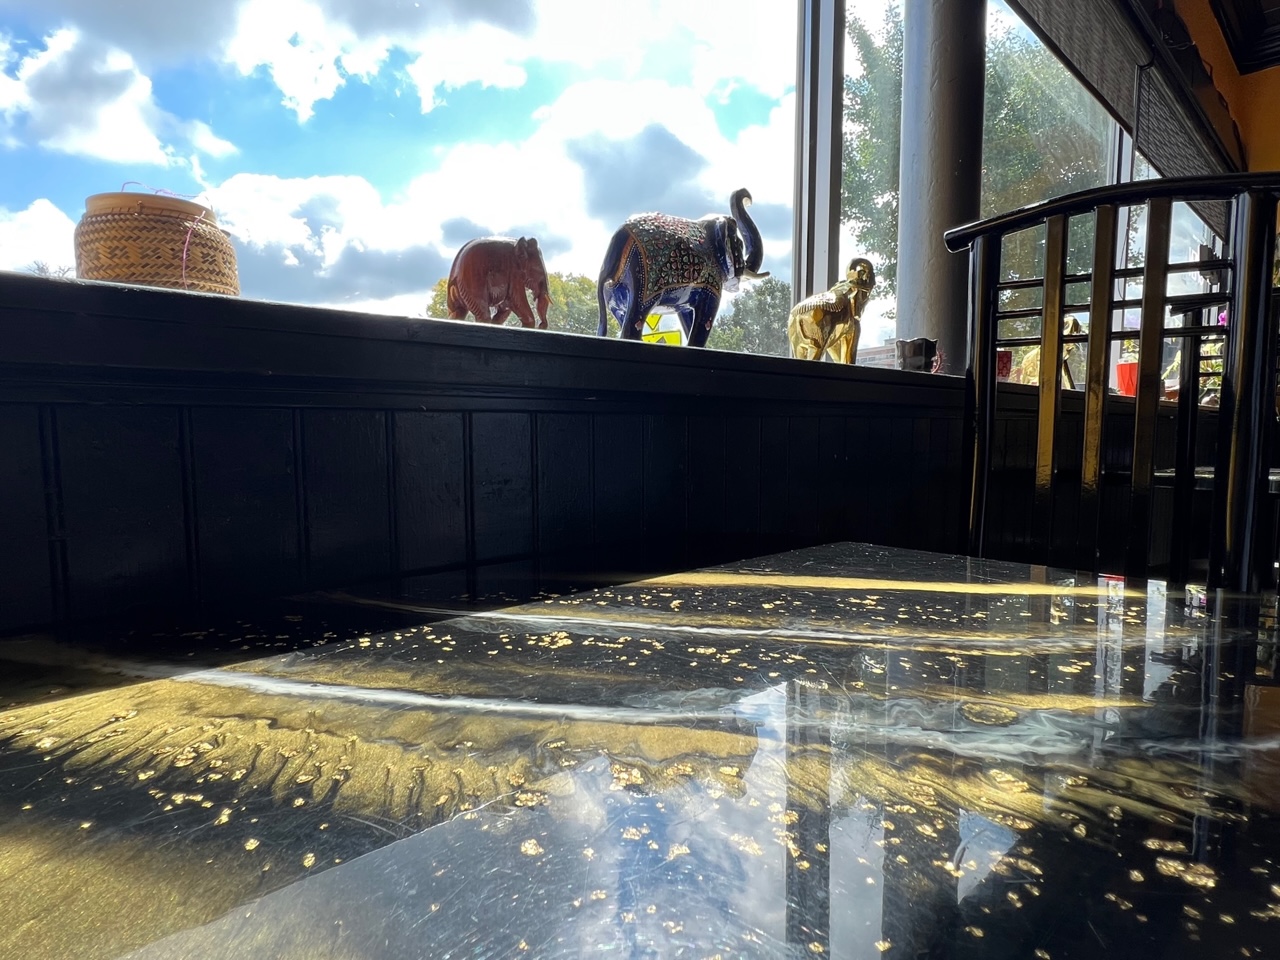 At Sticky Rice in Downtown Champaign, there are black and gold tables in a sun-drenched dining room. On the window ledge, there are various decorative elephants beside a window showing blue sky and wispy clouds. Photo by Alyssa Buckley.